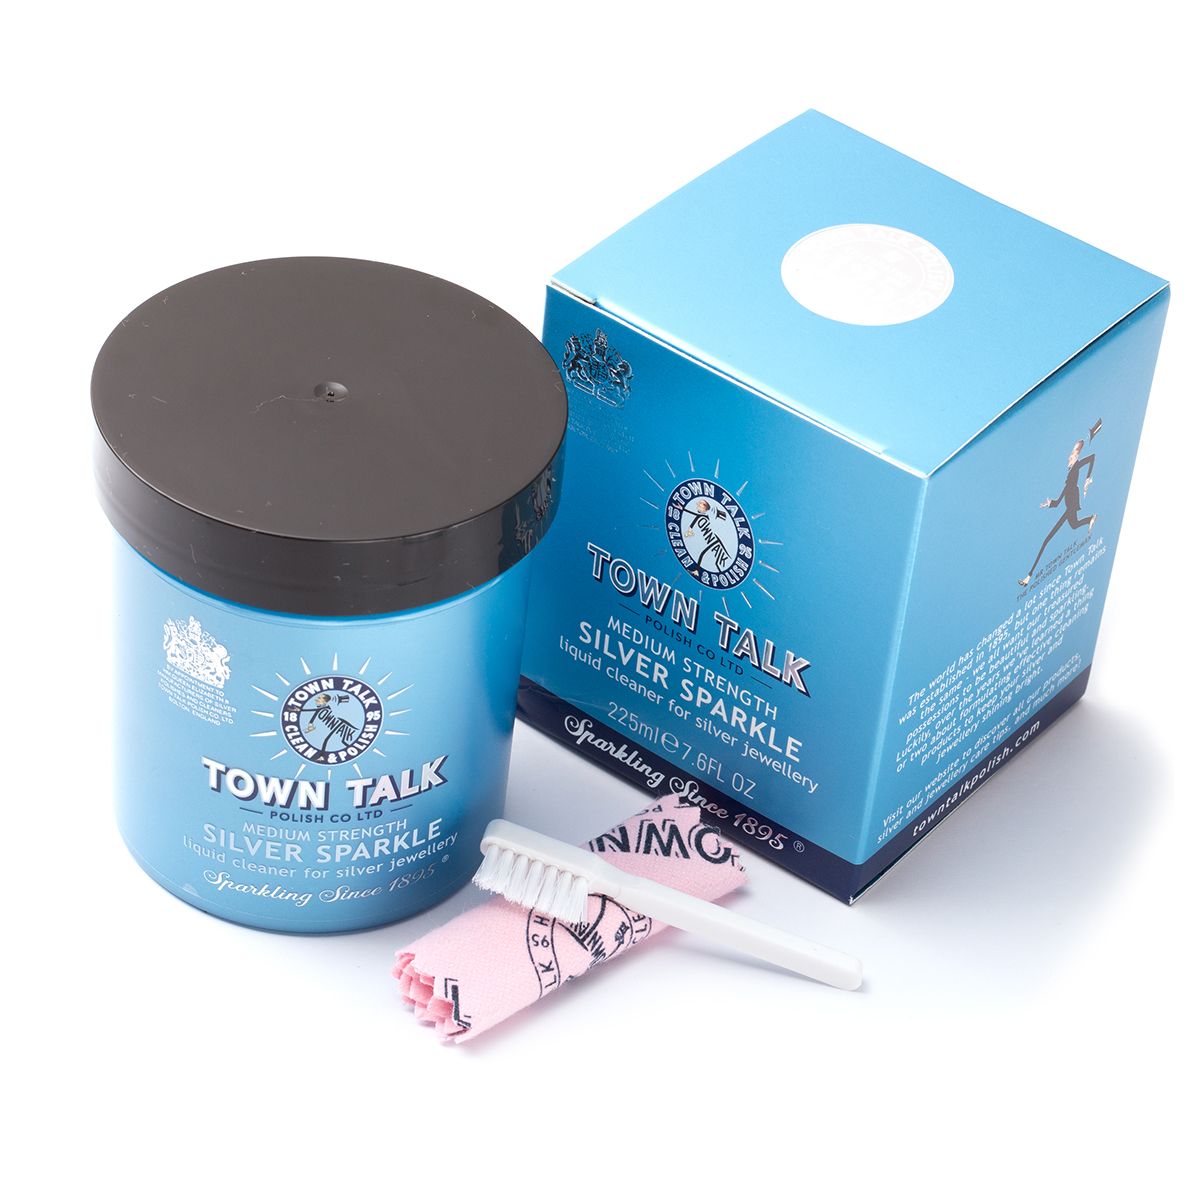 Town Talk Products For Cleaning & Caring For Jewellery